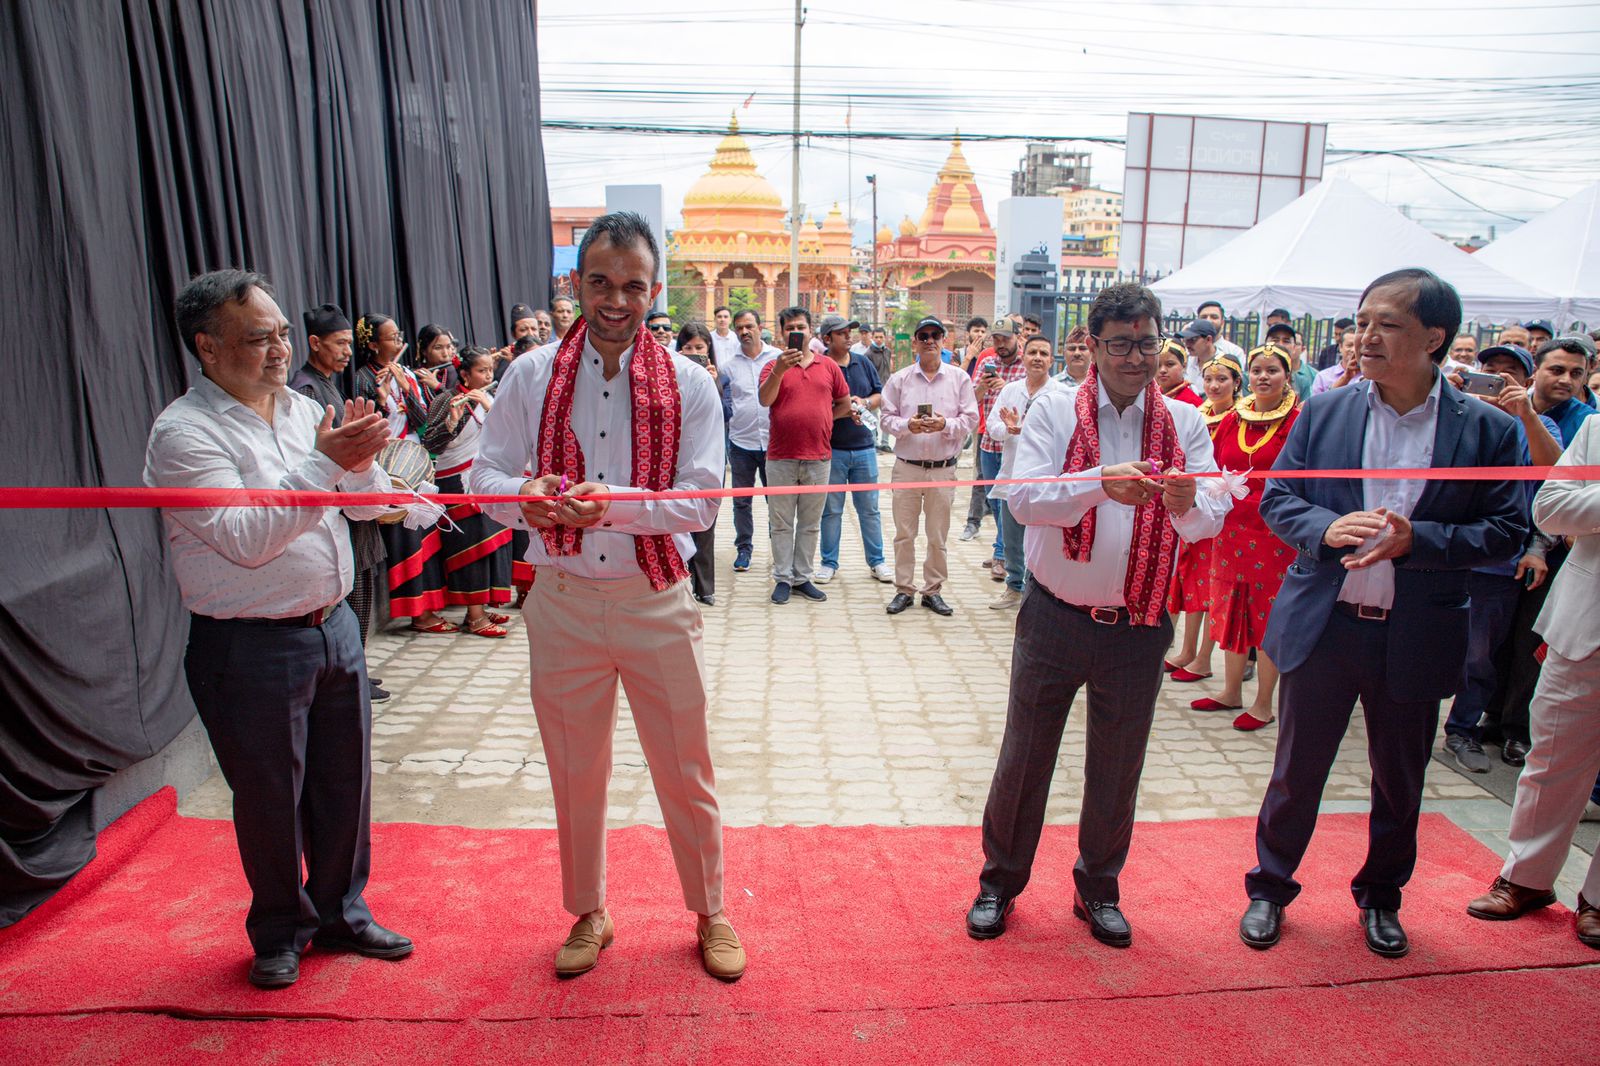 Cimex Inc. expands BYD service network with inauguration of 2 new state-of-the-art service centers in Kathmandu valley